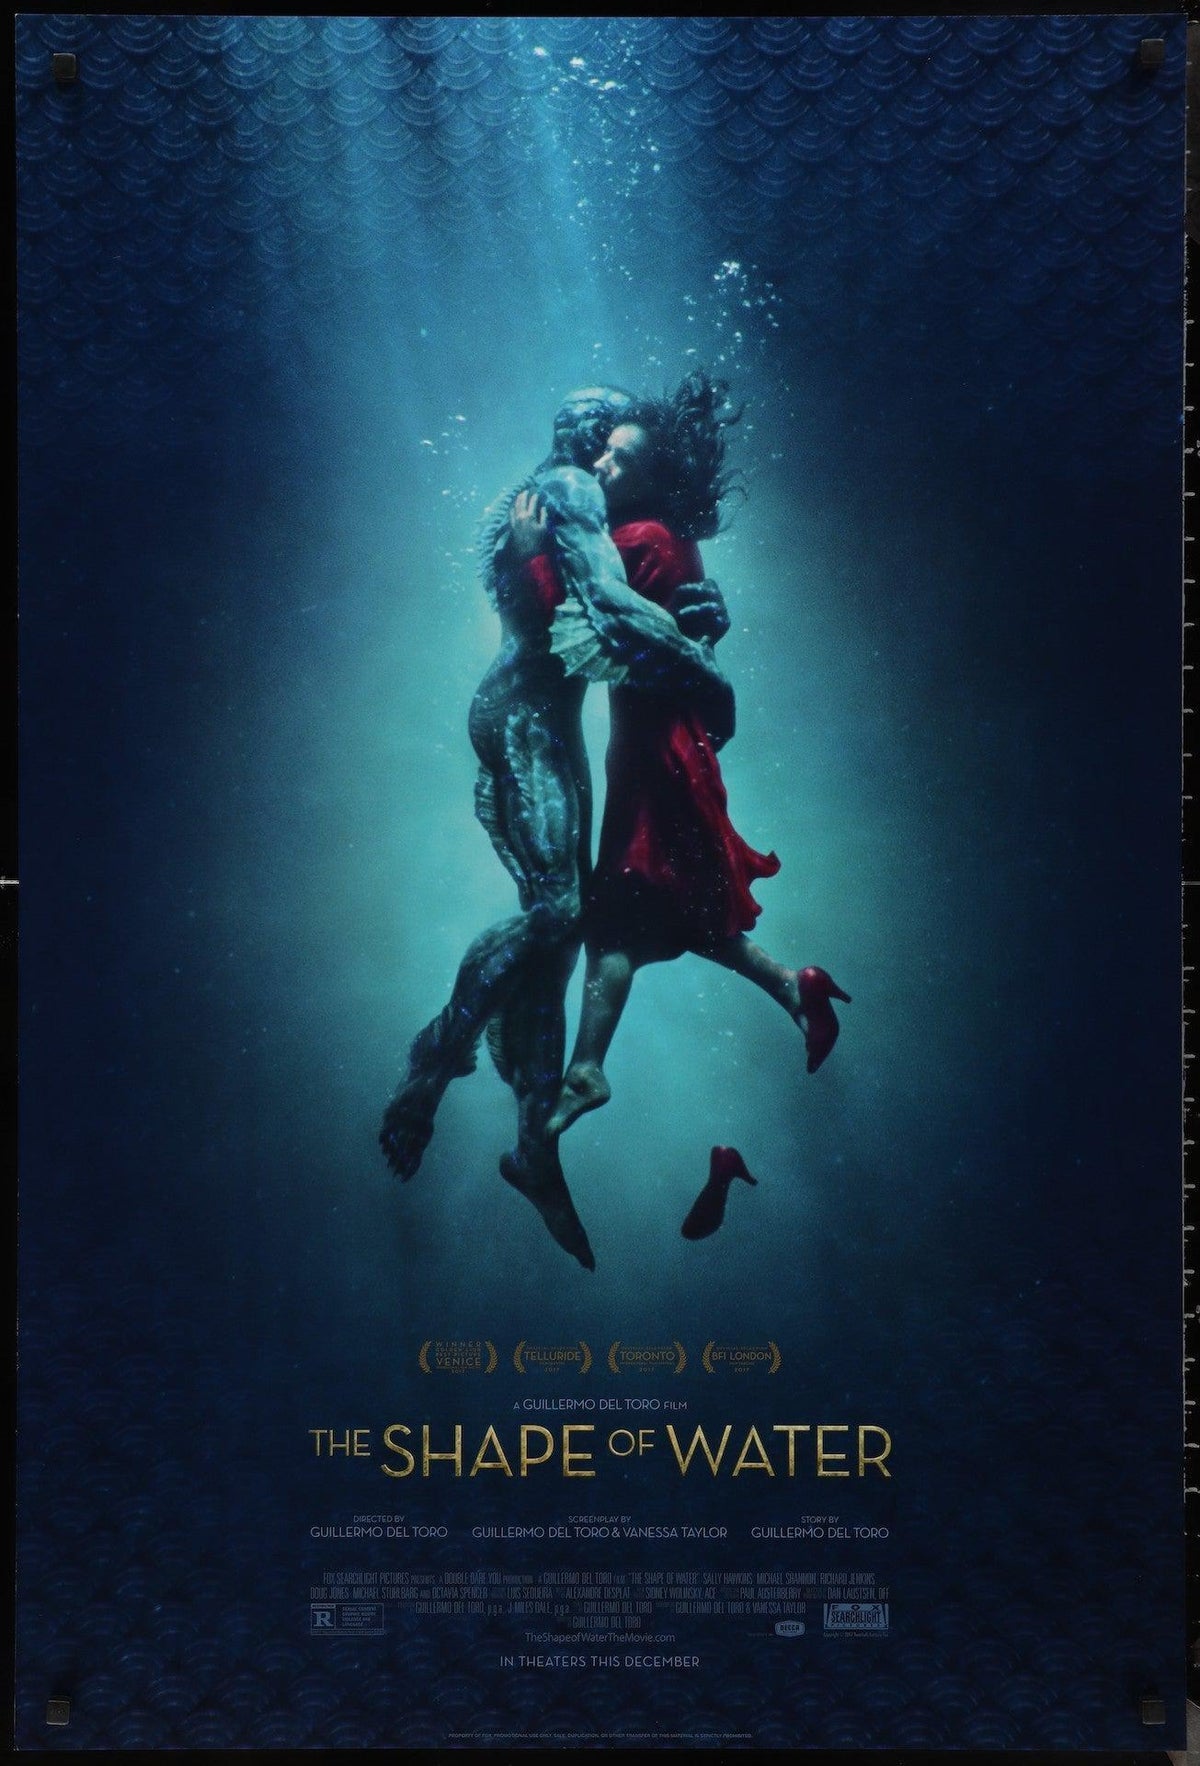 The Shape of Water 1 Sheet (27x41) Original Vintage Movie Poster